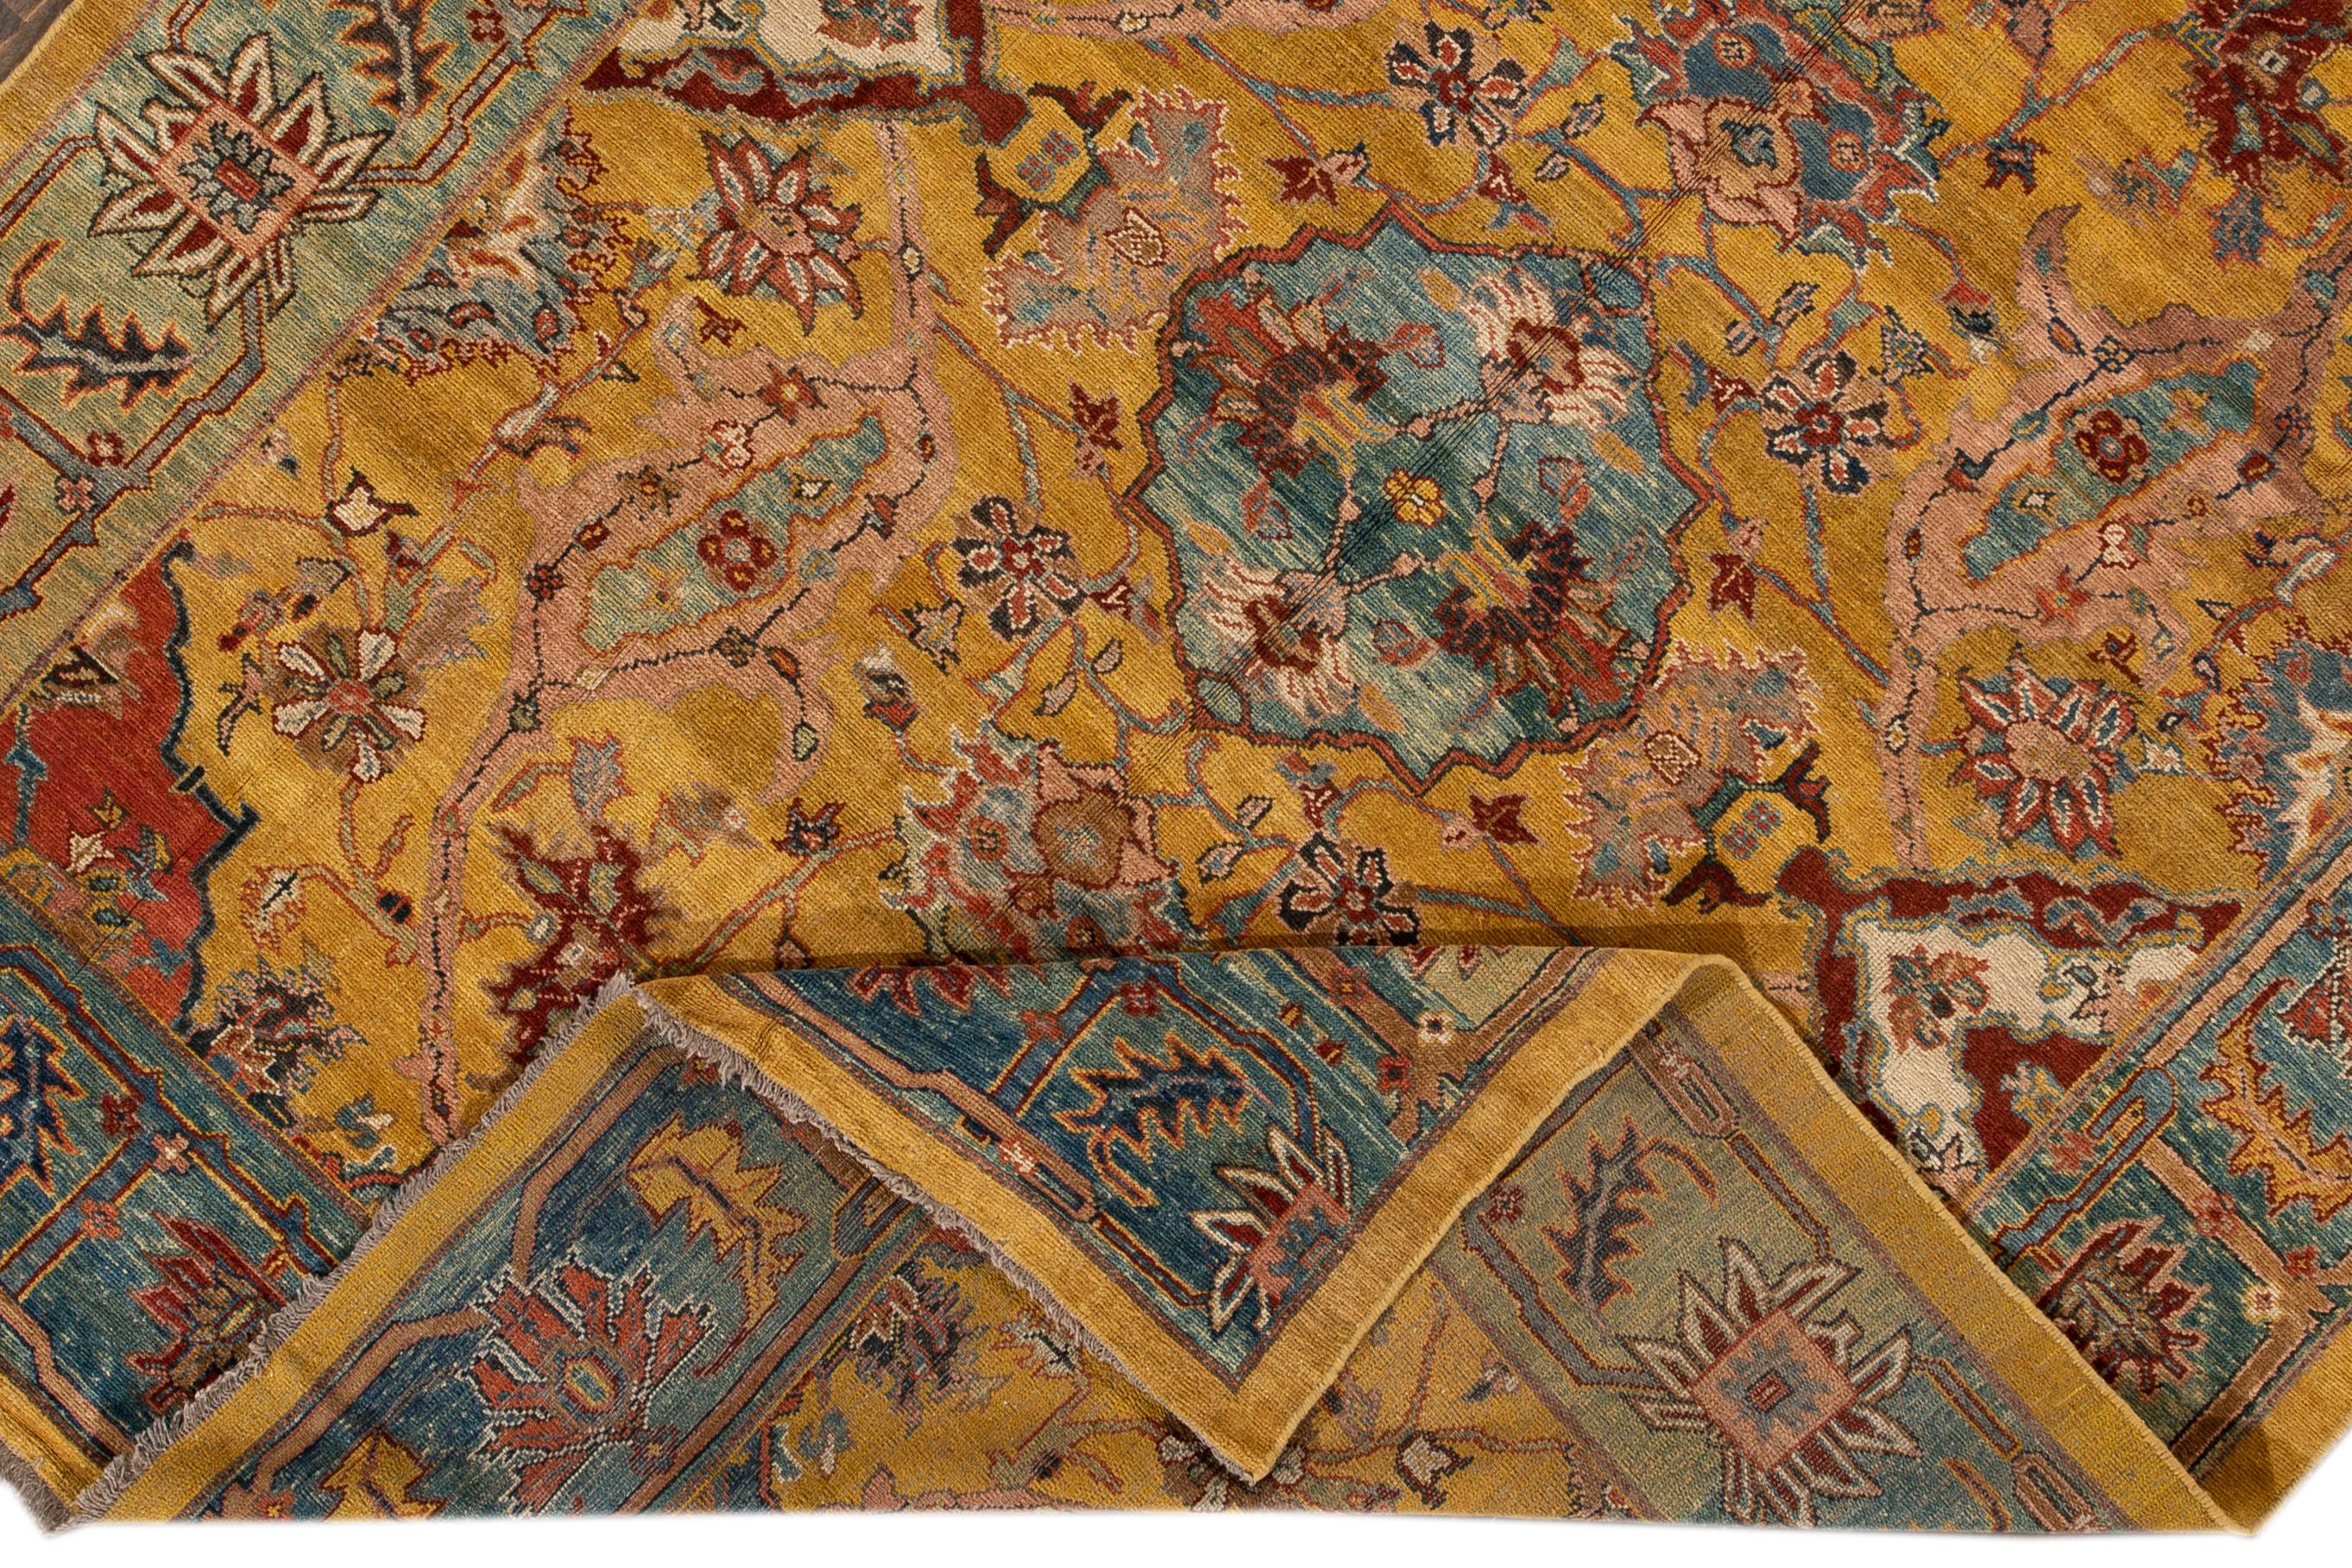 Beautiful vintage Bakshaish wool rug with a yellow field, and multi-color accents in an all-over geometric design.

This rug measures 7' 5